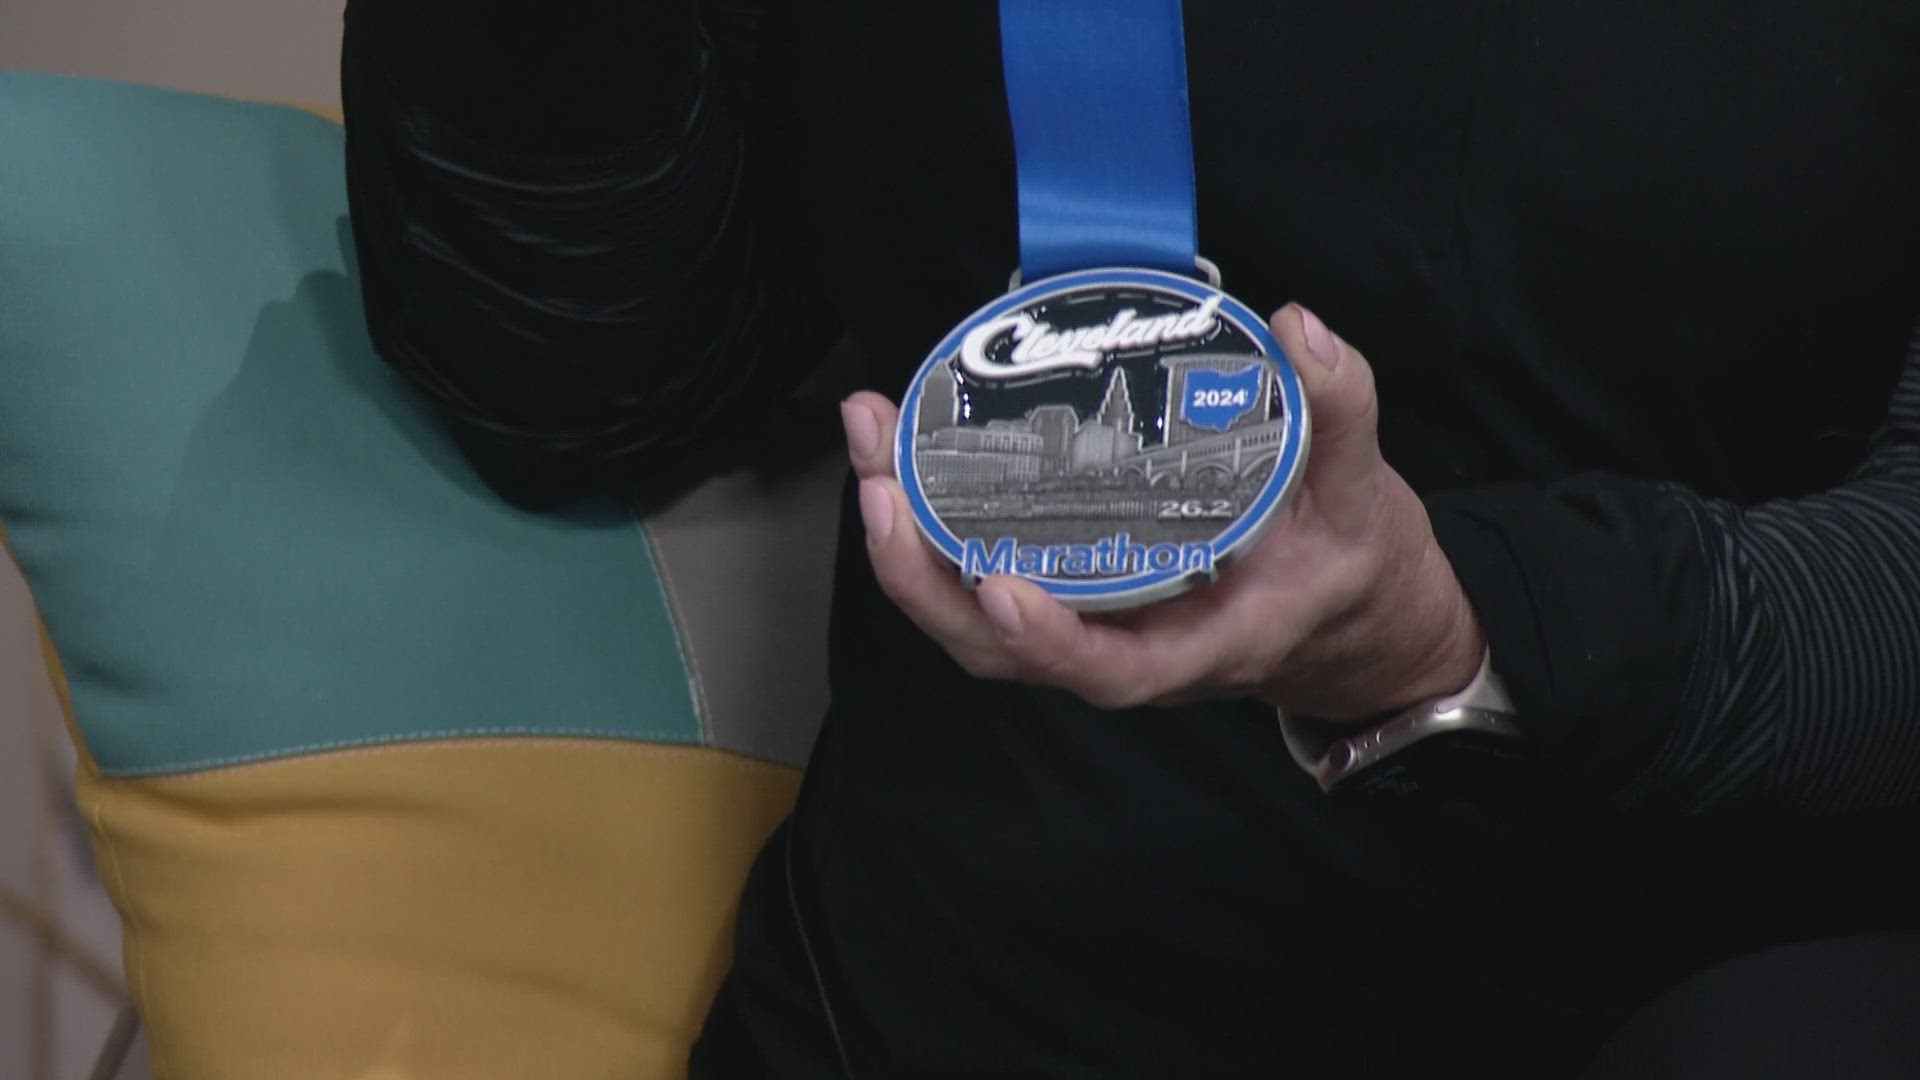 We're getting a first look at the medals for the 2024 Cleveland Marathon.